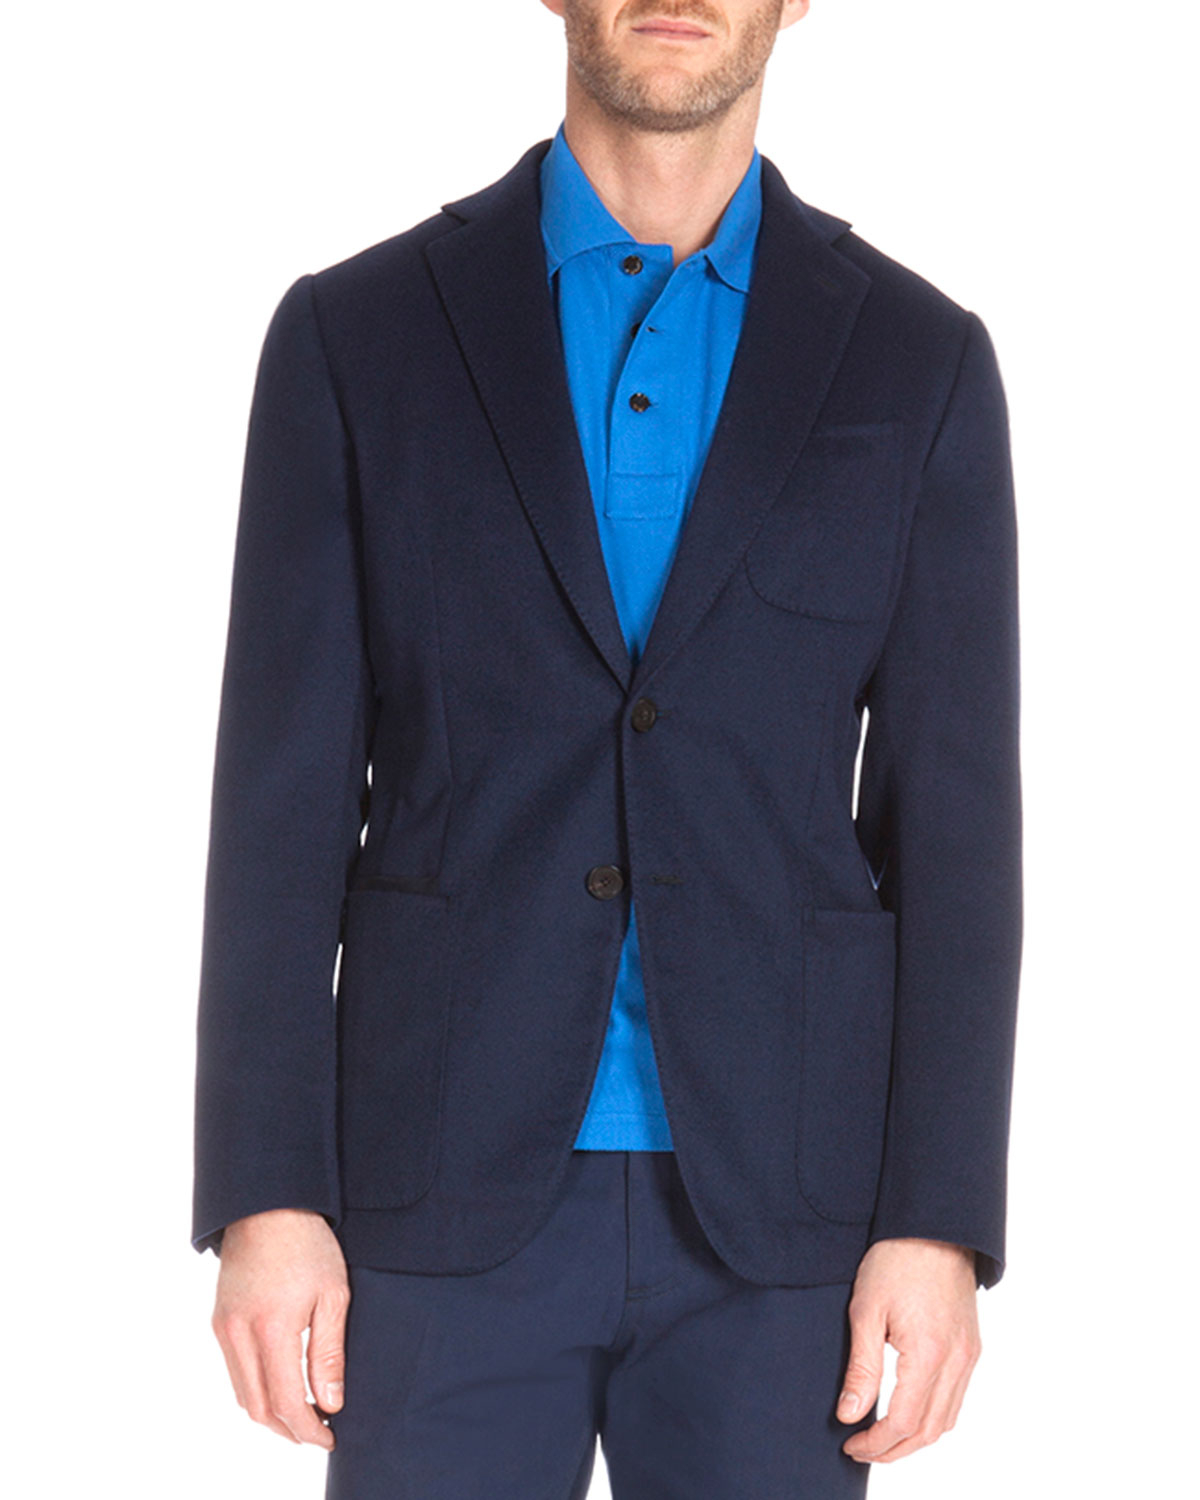 Lyst - Berluti Two-Button Unlined Cashmere Jacket in Blue for Men